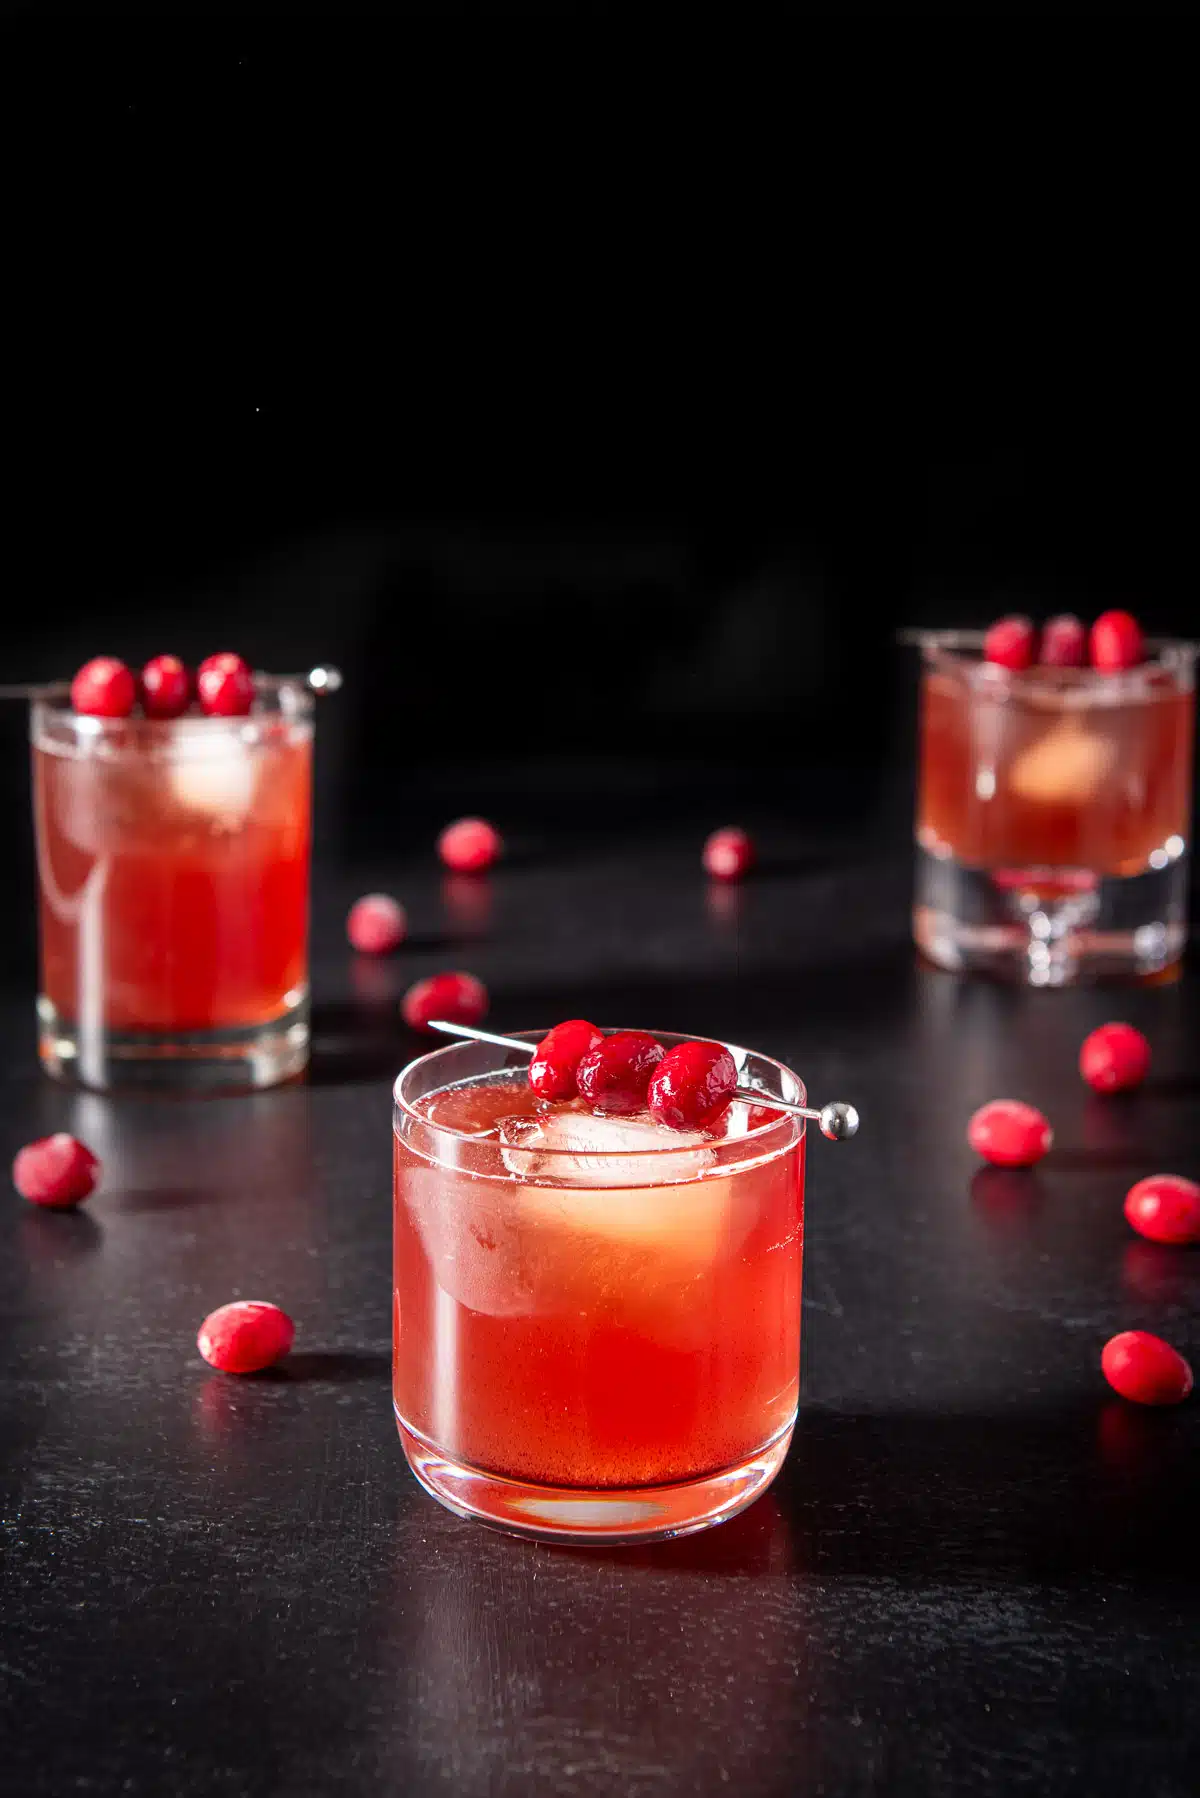 Closer view of the cranberry cocktail with cranberries on skewers and on the table with the other drinks